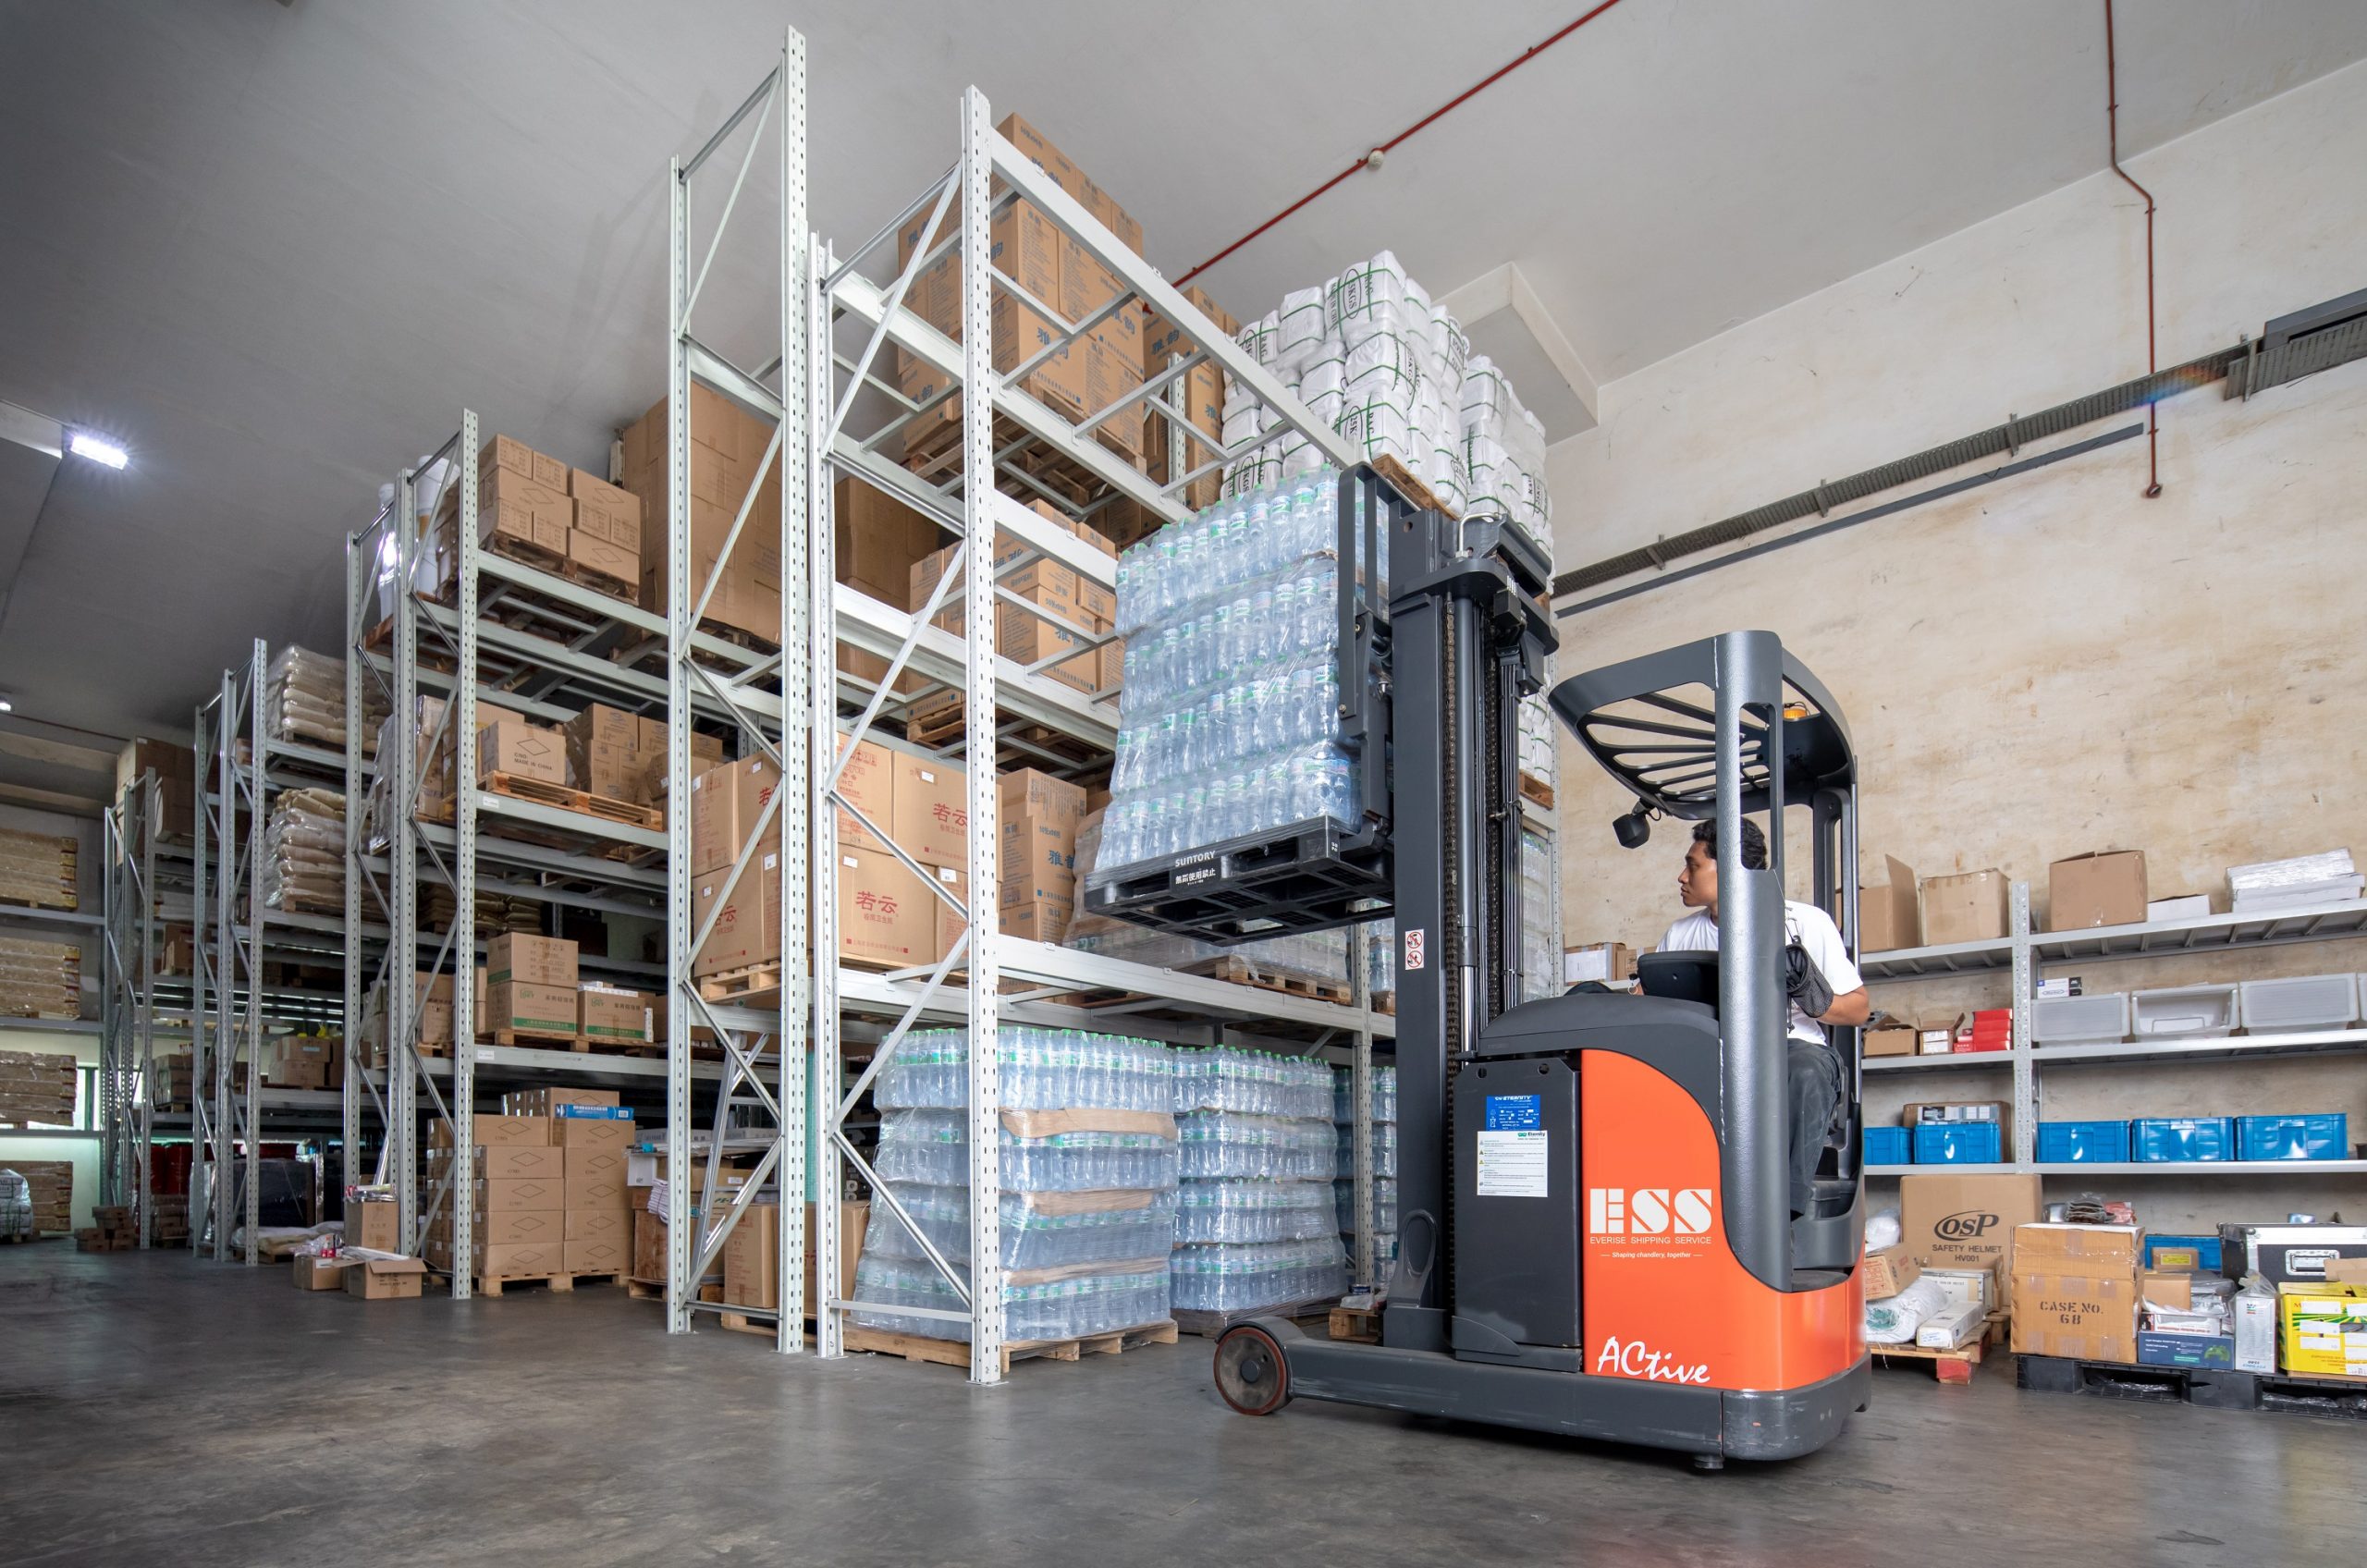 Own Warehouse, Everise Shipping Service, Technology at work